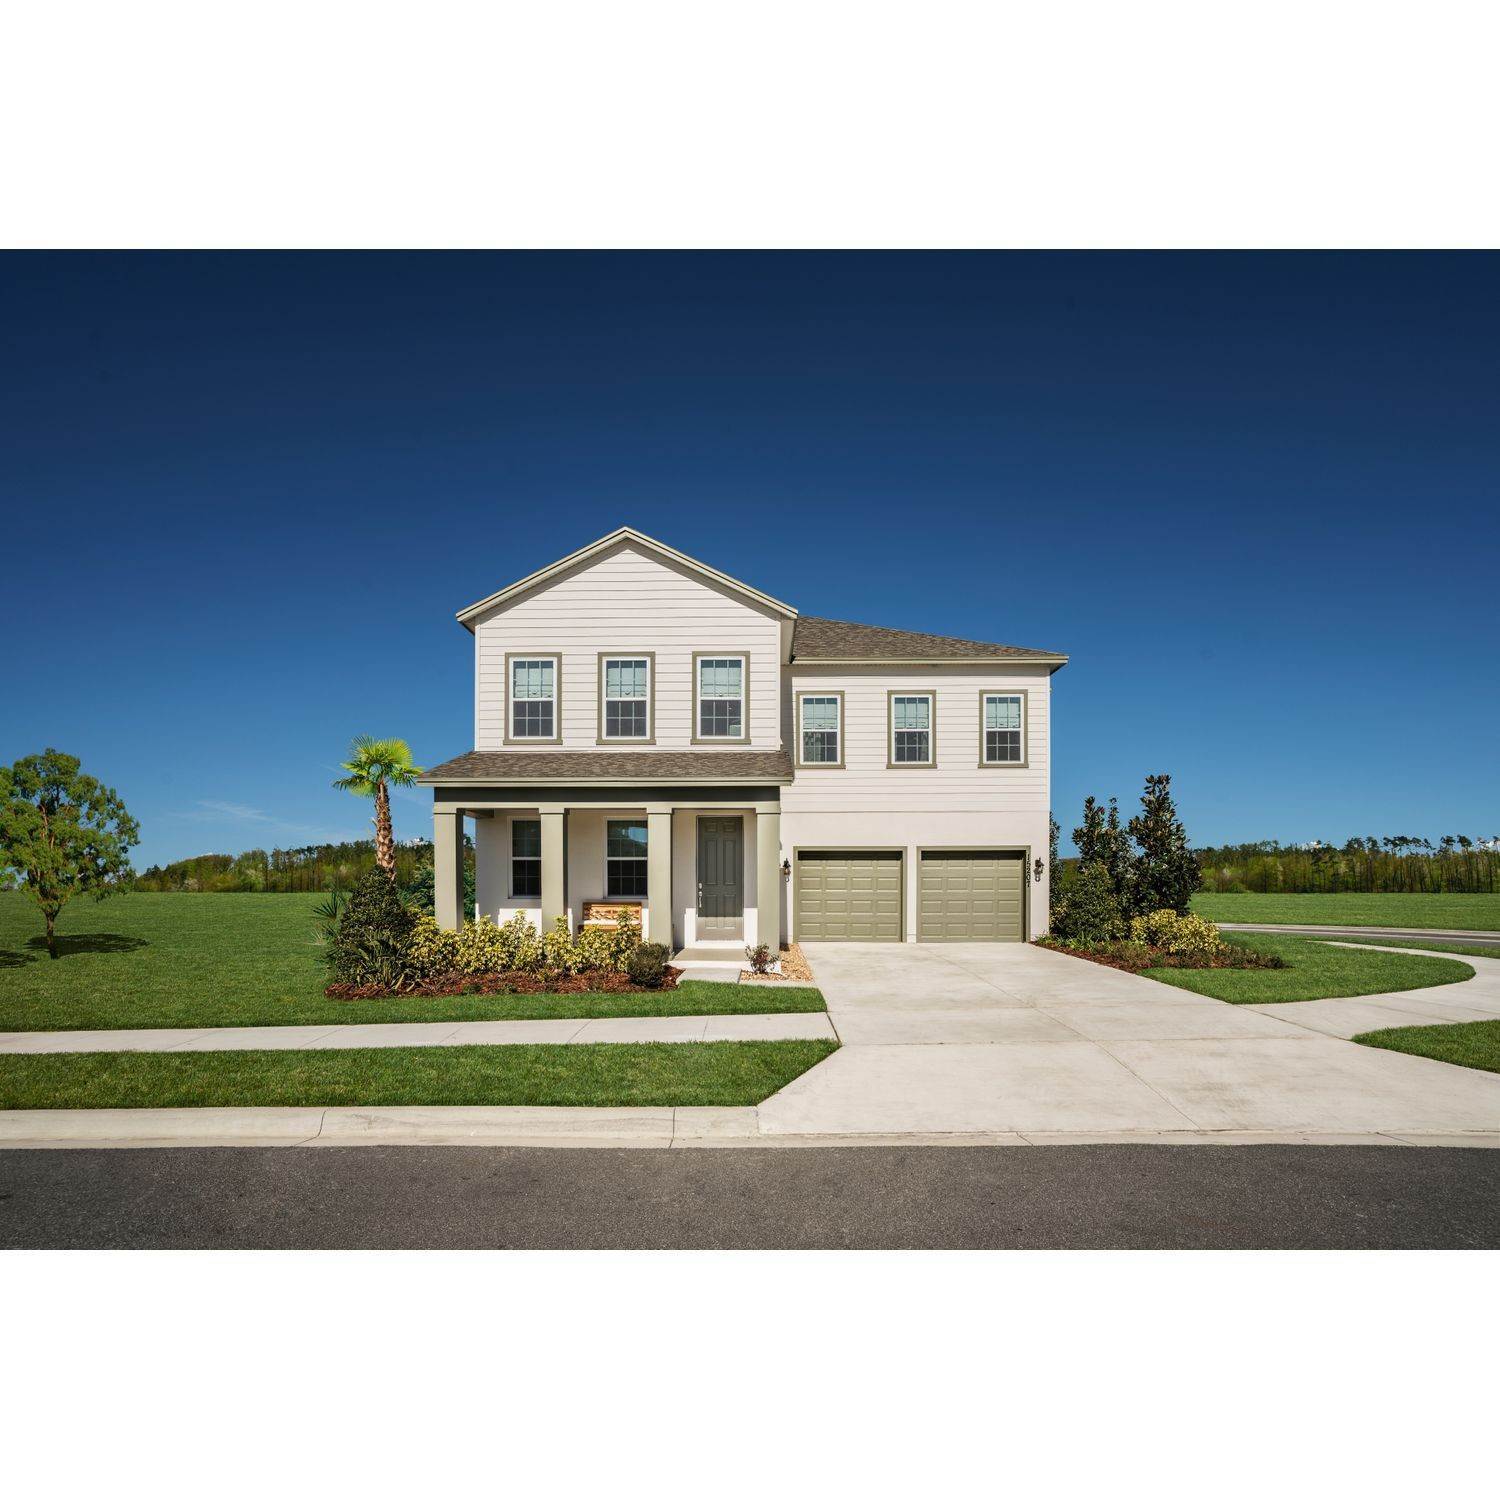 Single Family for Sale at Minneola, FL 34715